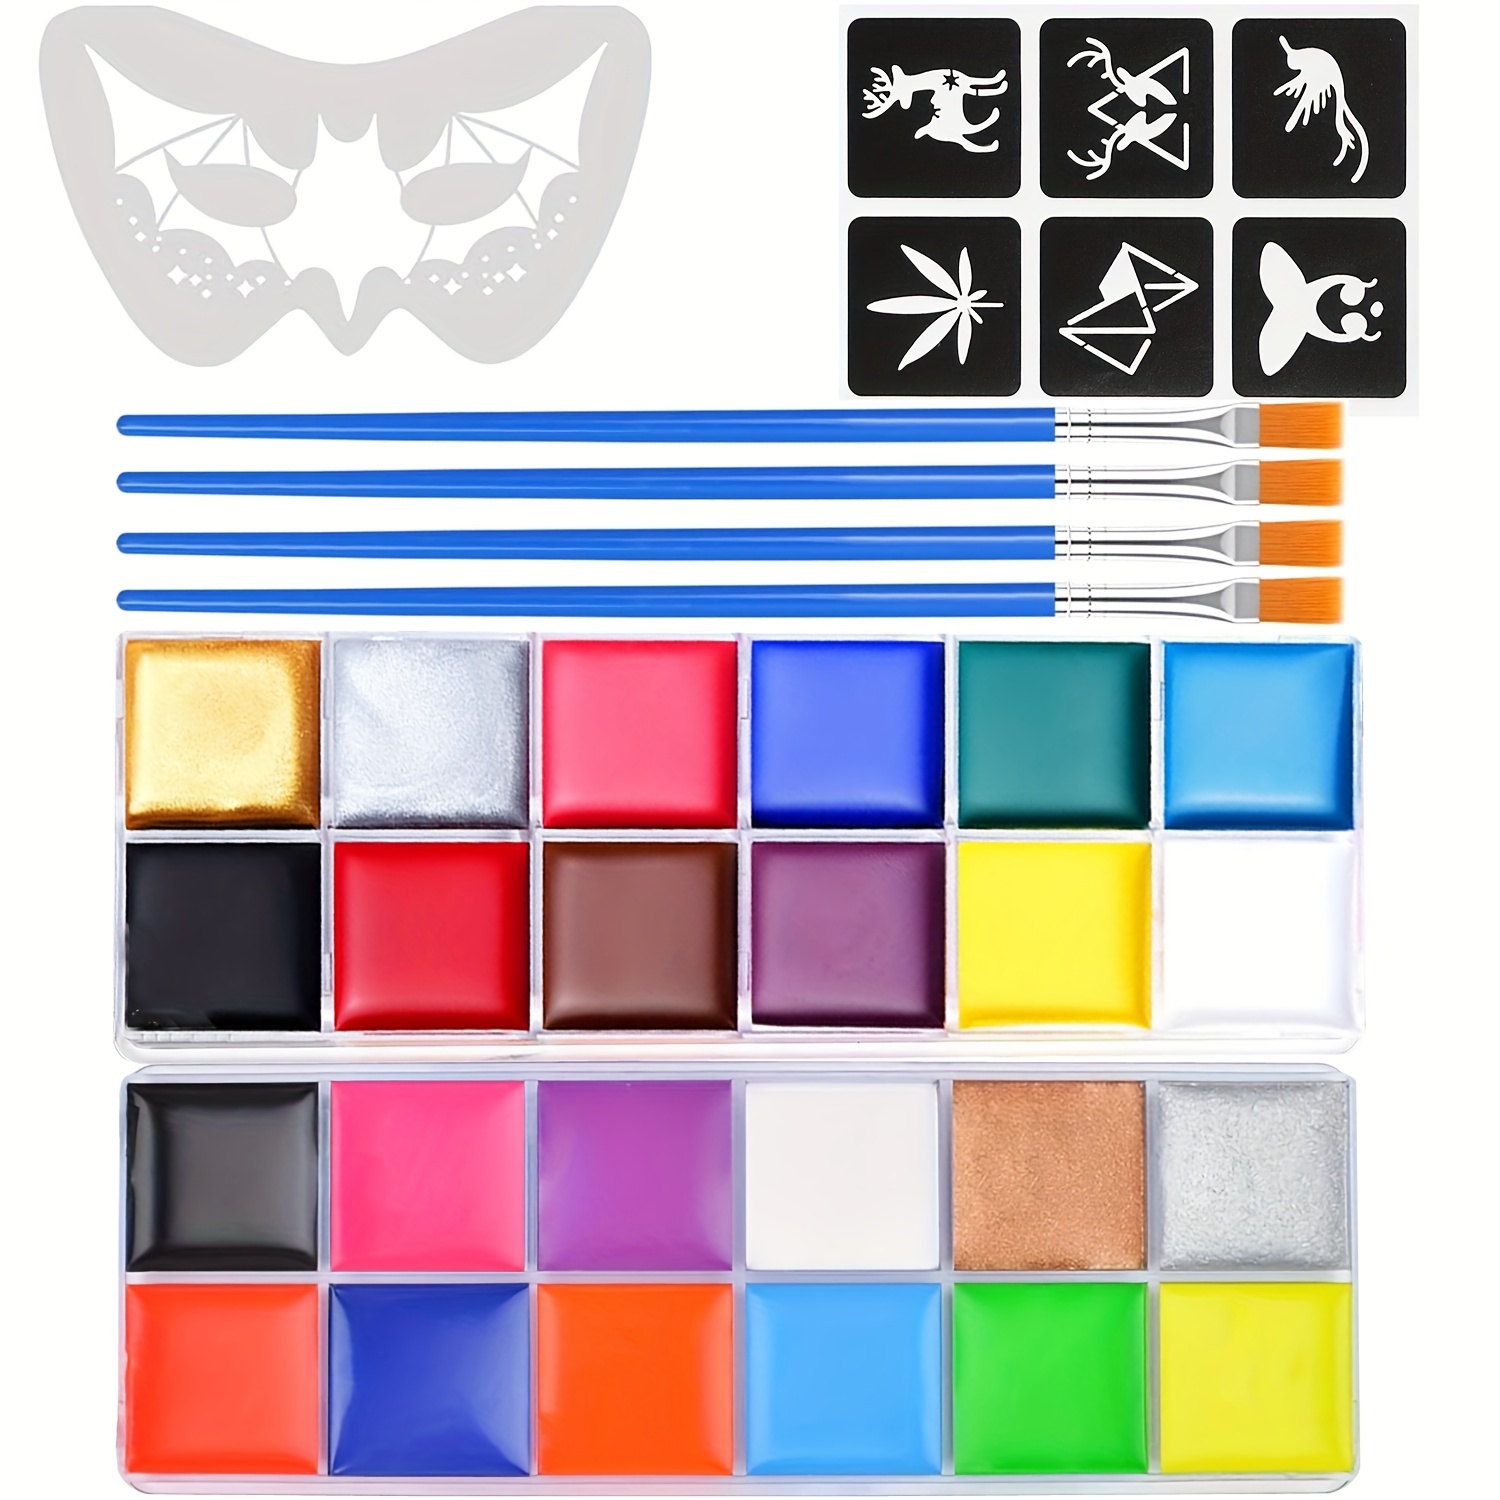 

24-color Face Painting Kit With Brushes & Stencils, Neon Color Tone, Non-toxic Party Makeup Set, Halloween Cosmetics Palette For Adults